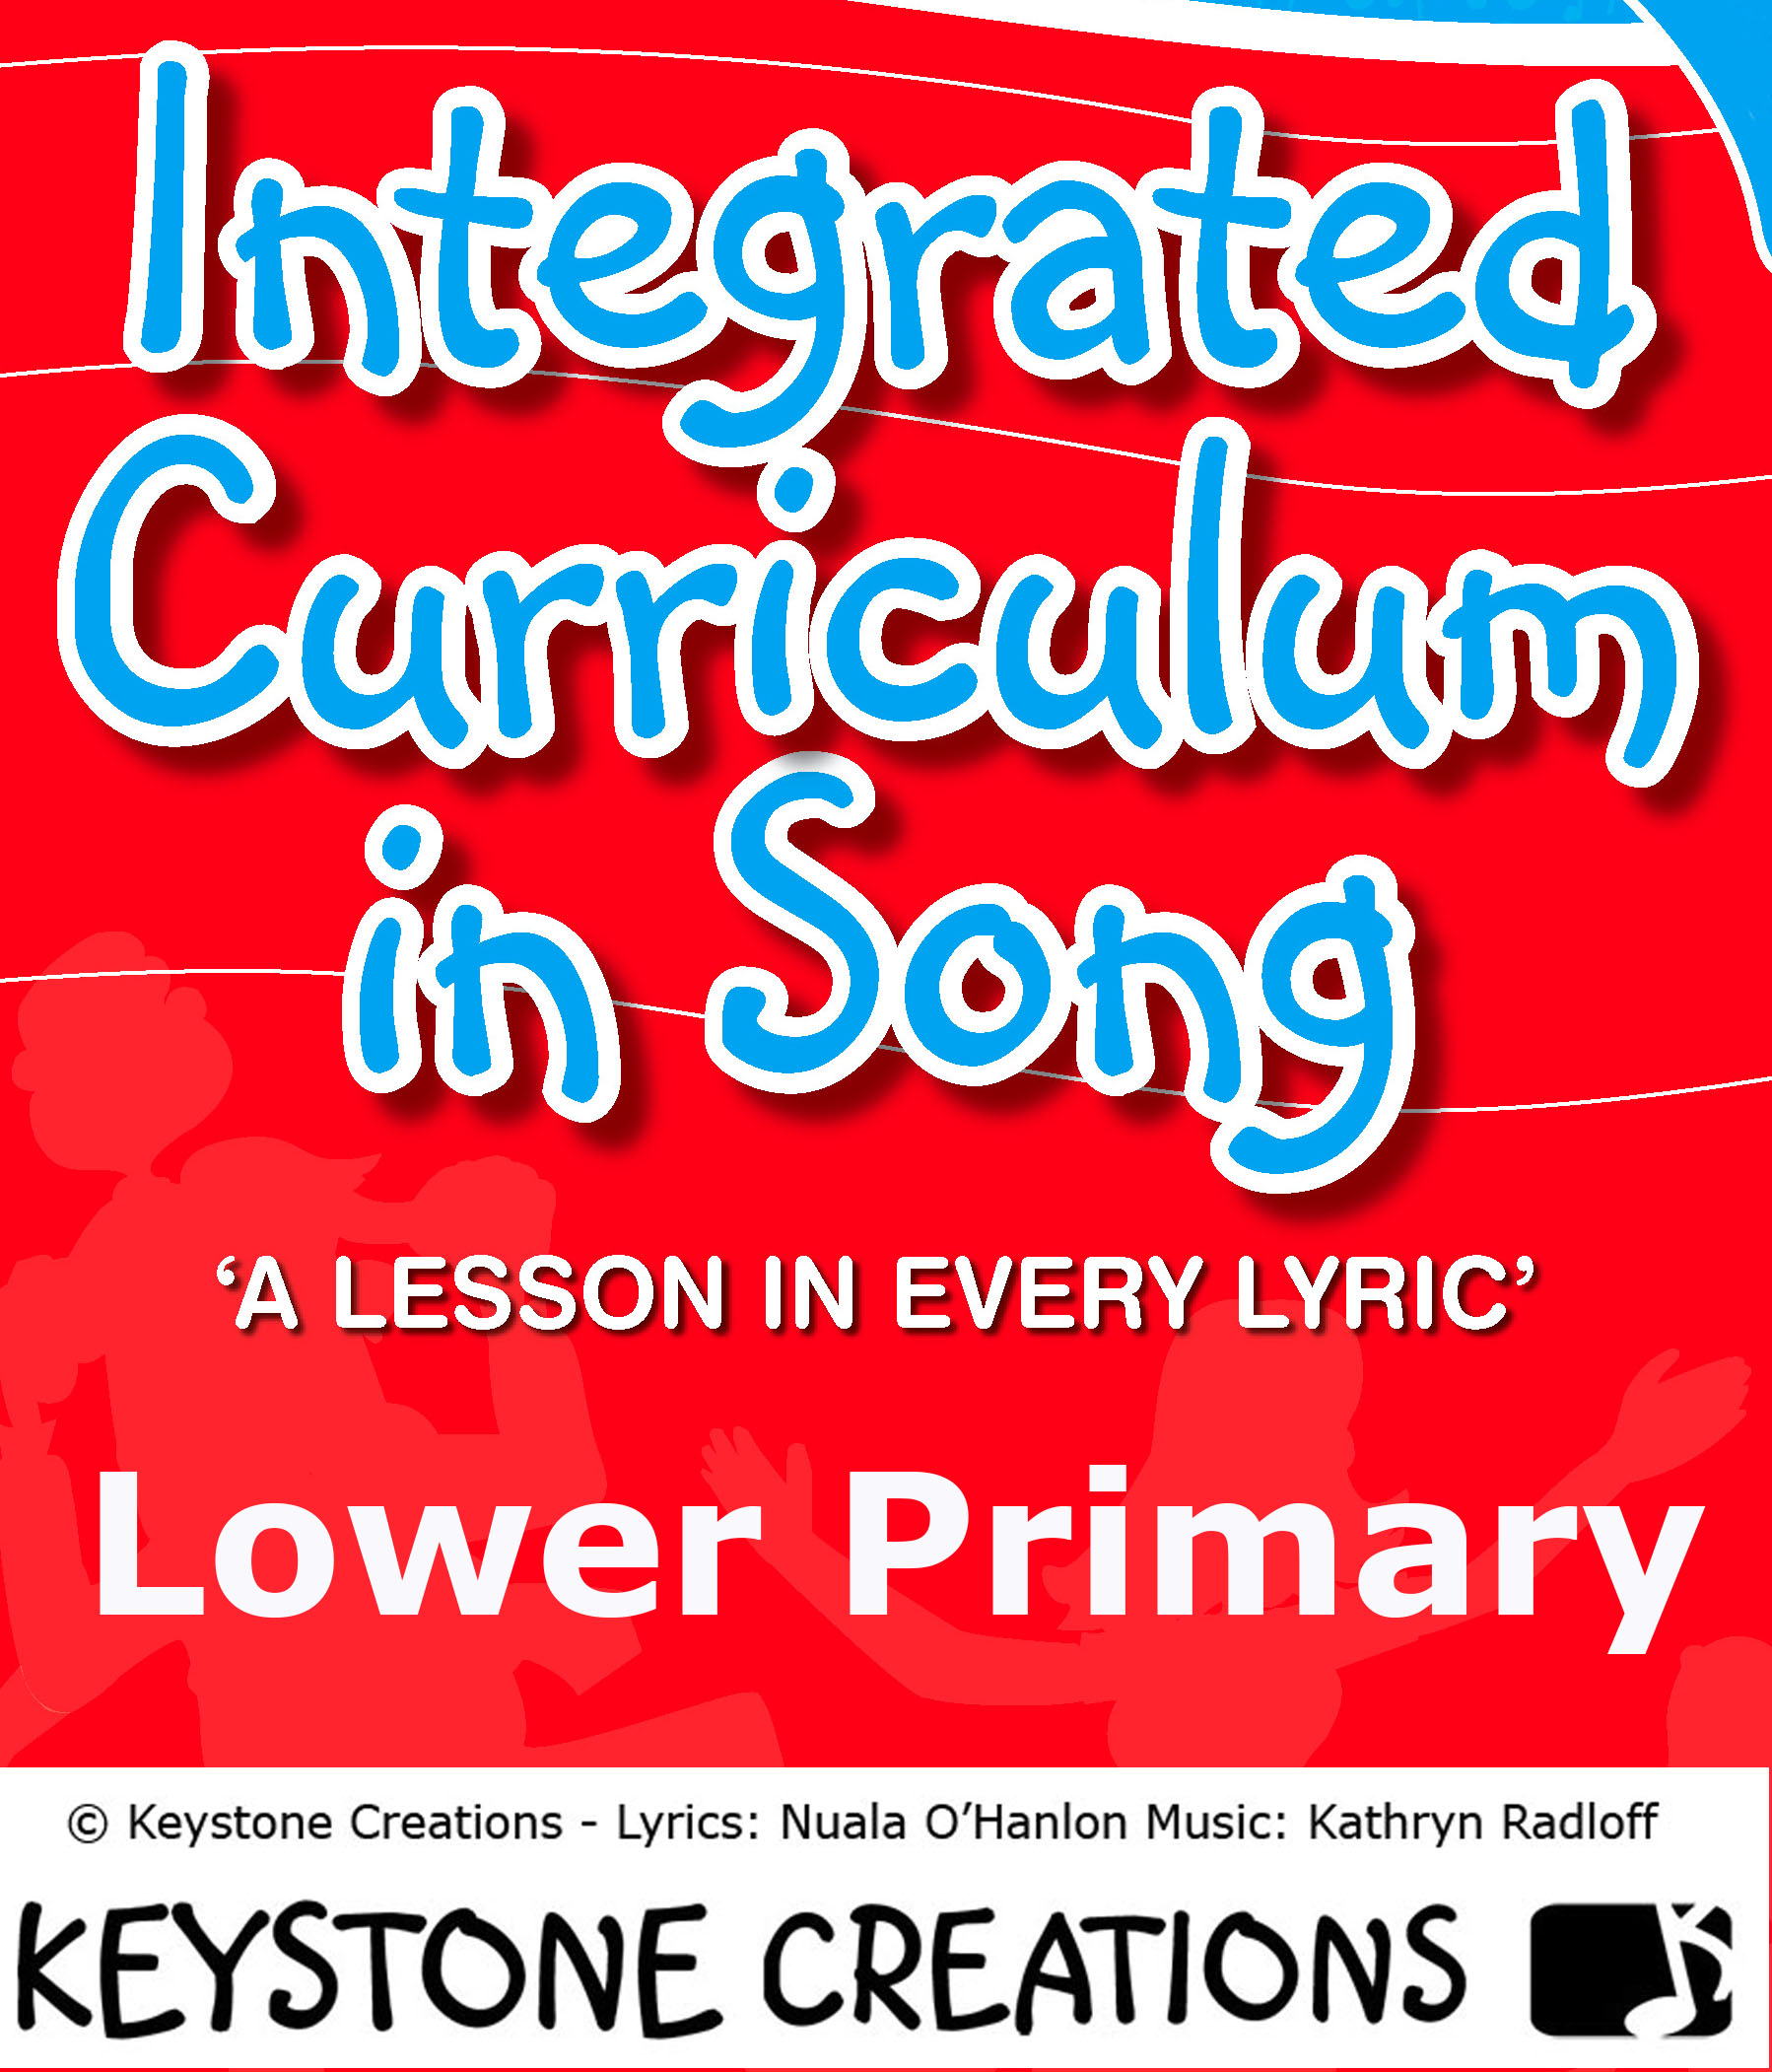 INTEGRATED CURRICULUM IN SONG ~ 12 Songs & Lesson Materials